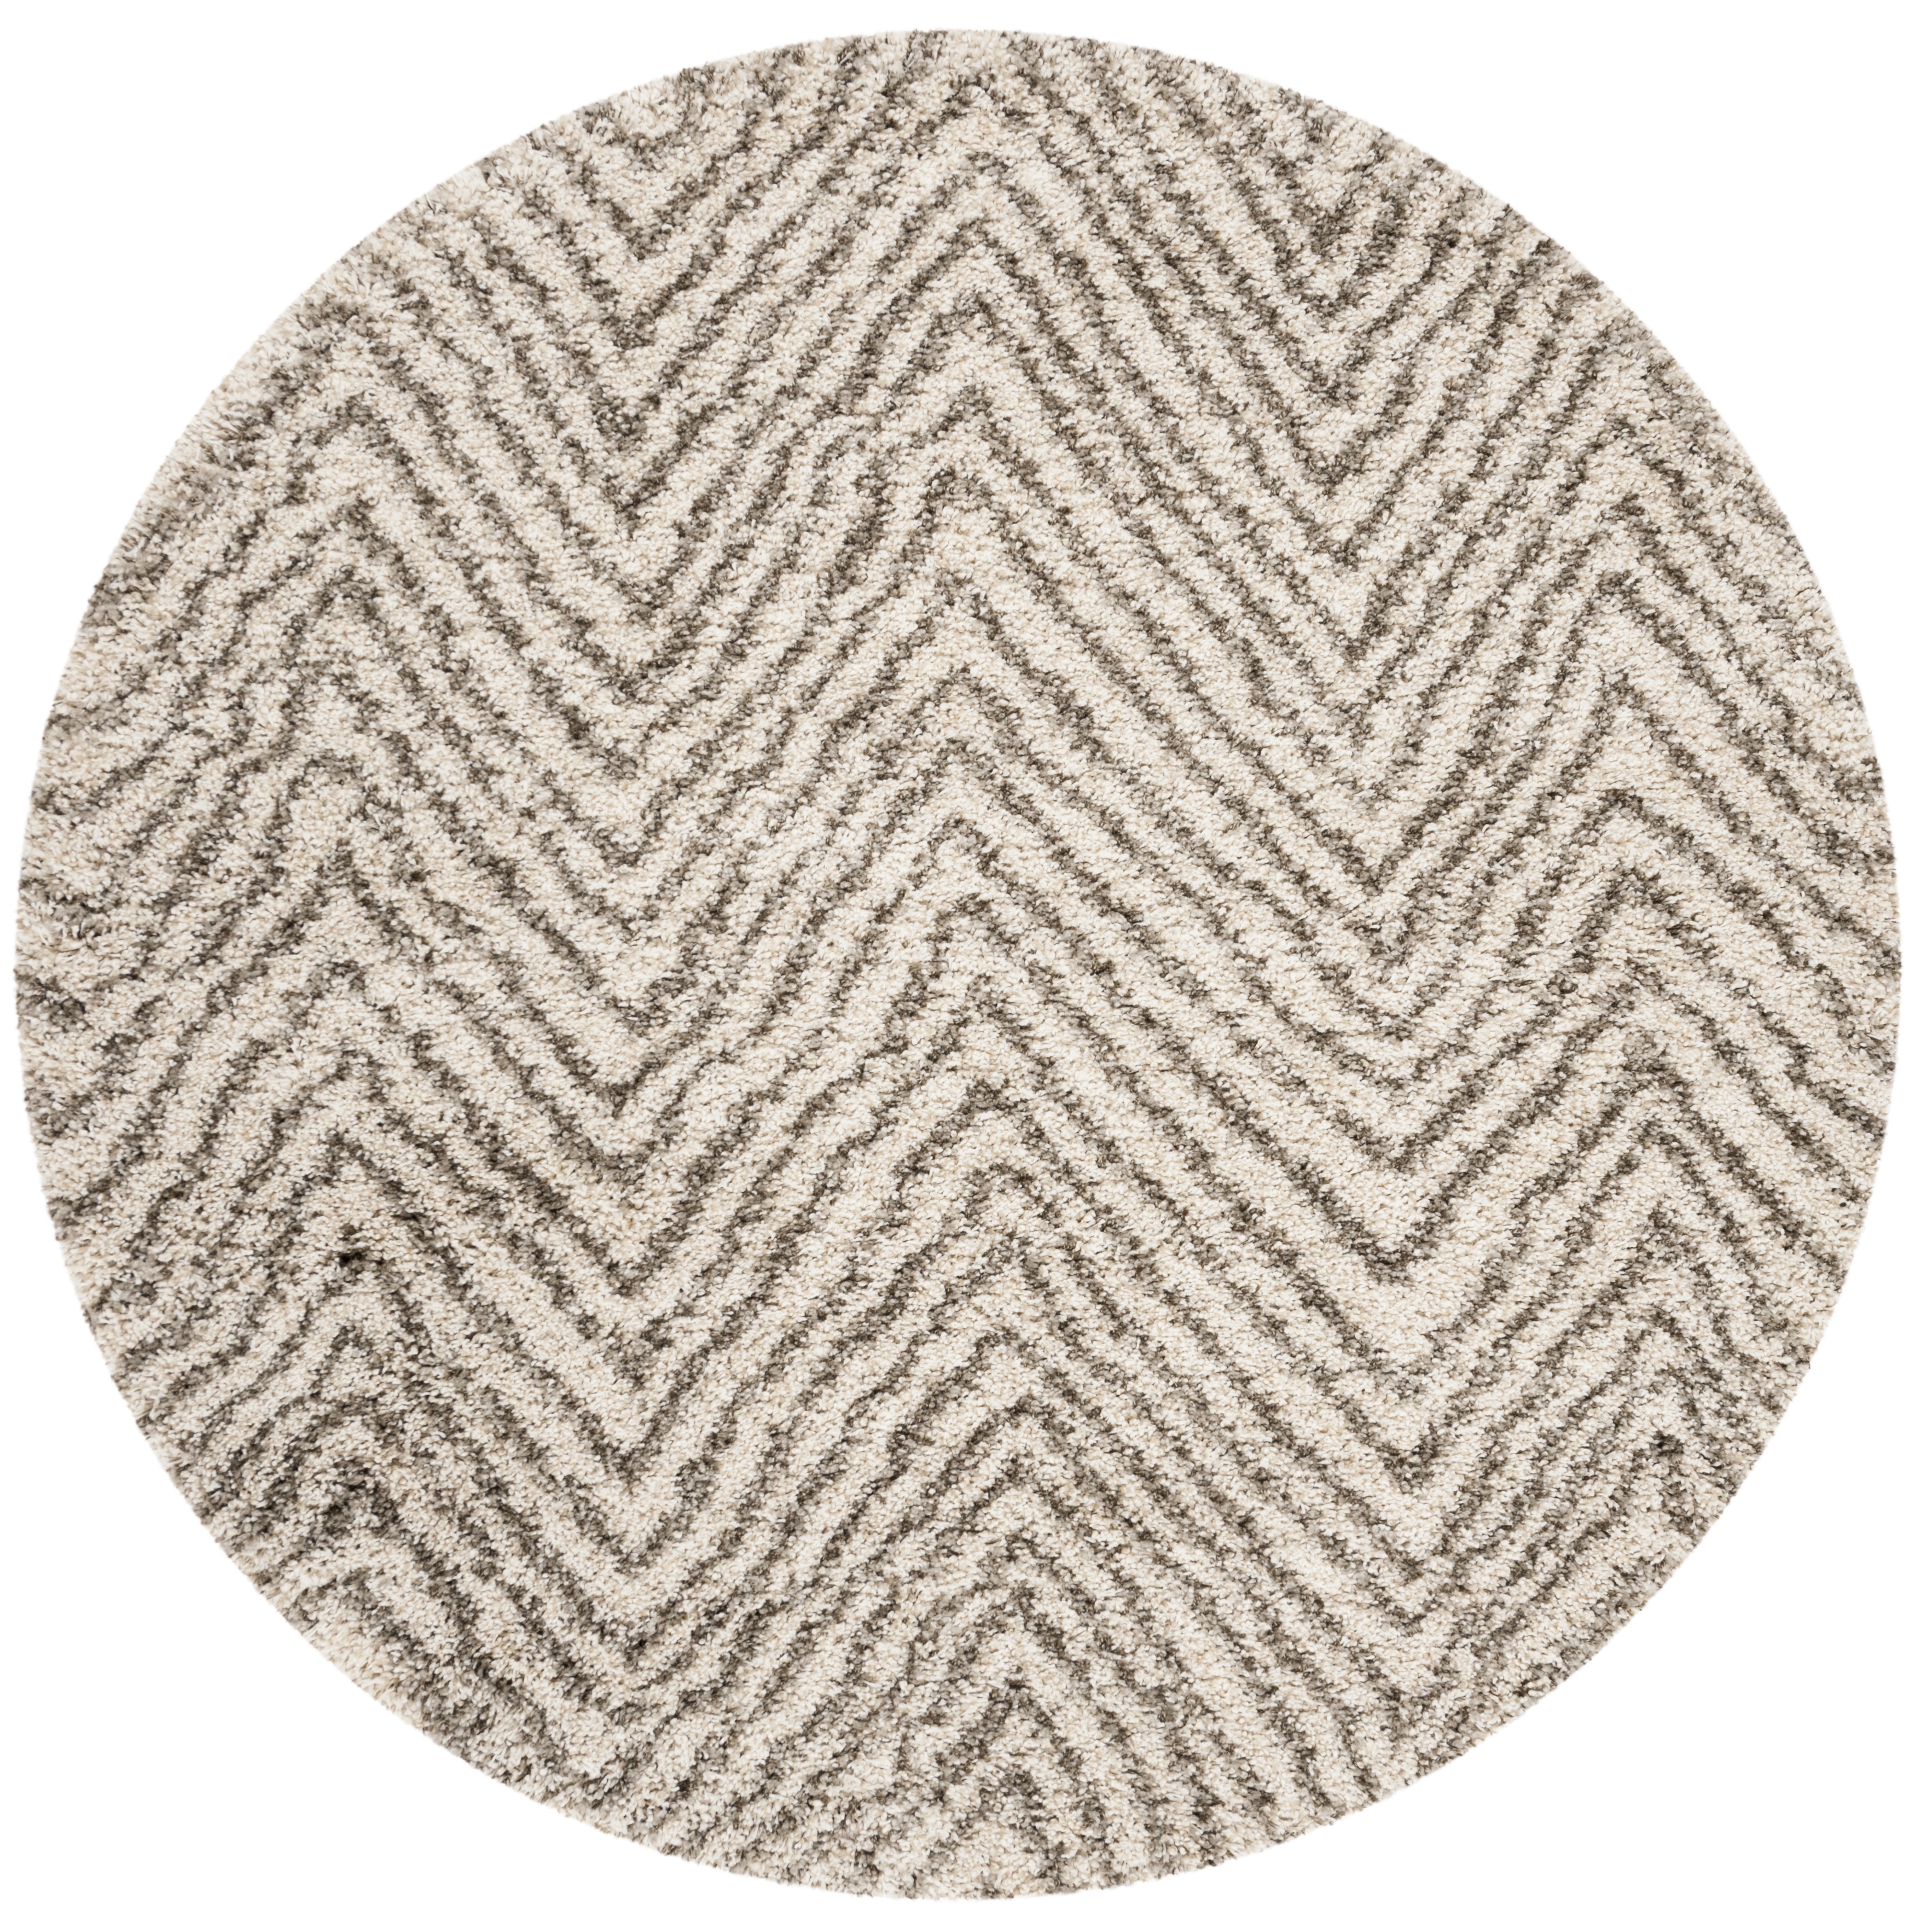 Arlo Home Woven Area Rug, SGH375A, Ivory/Grey,  7' X 7' Round - Image 0